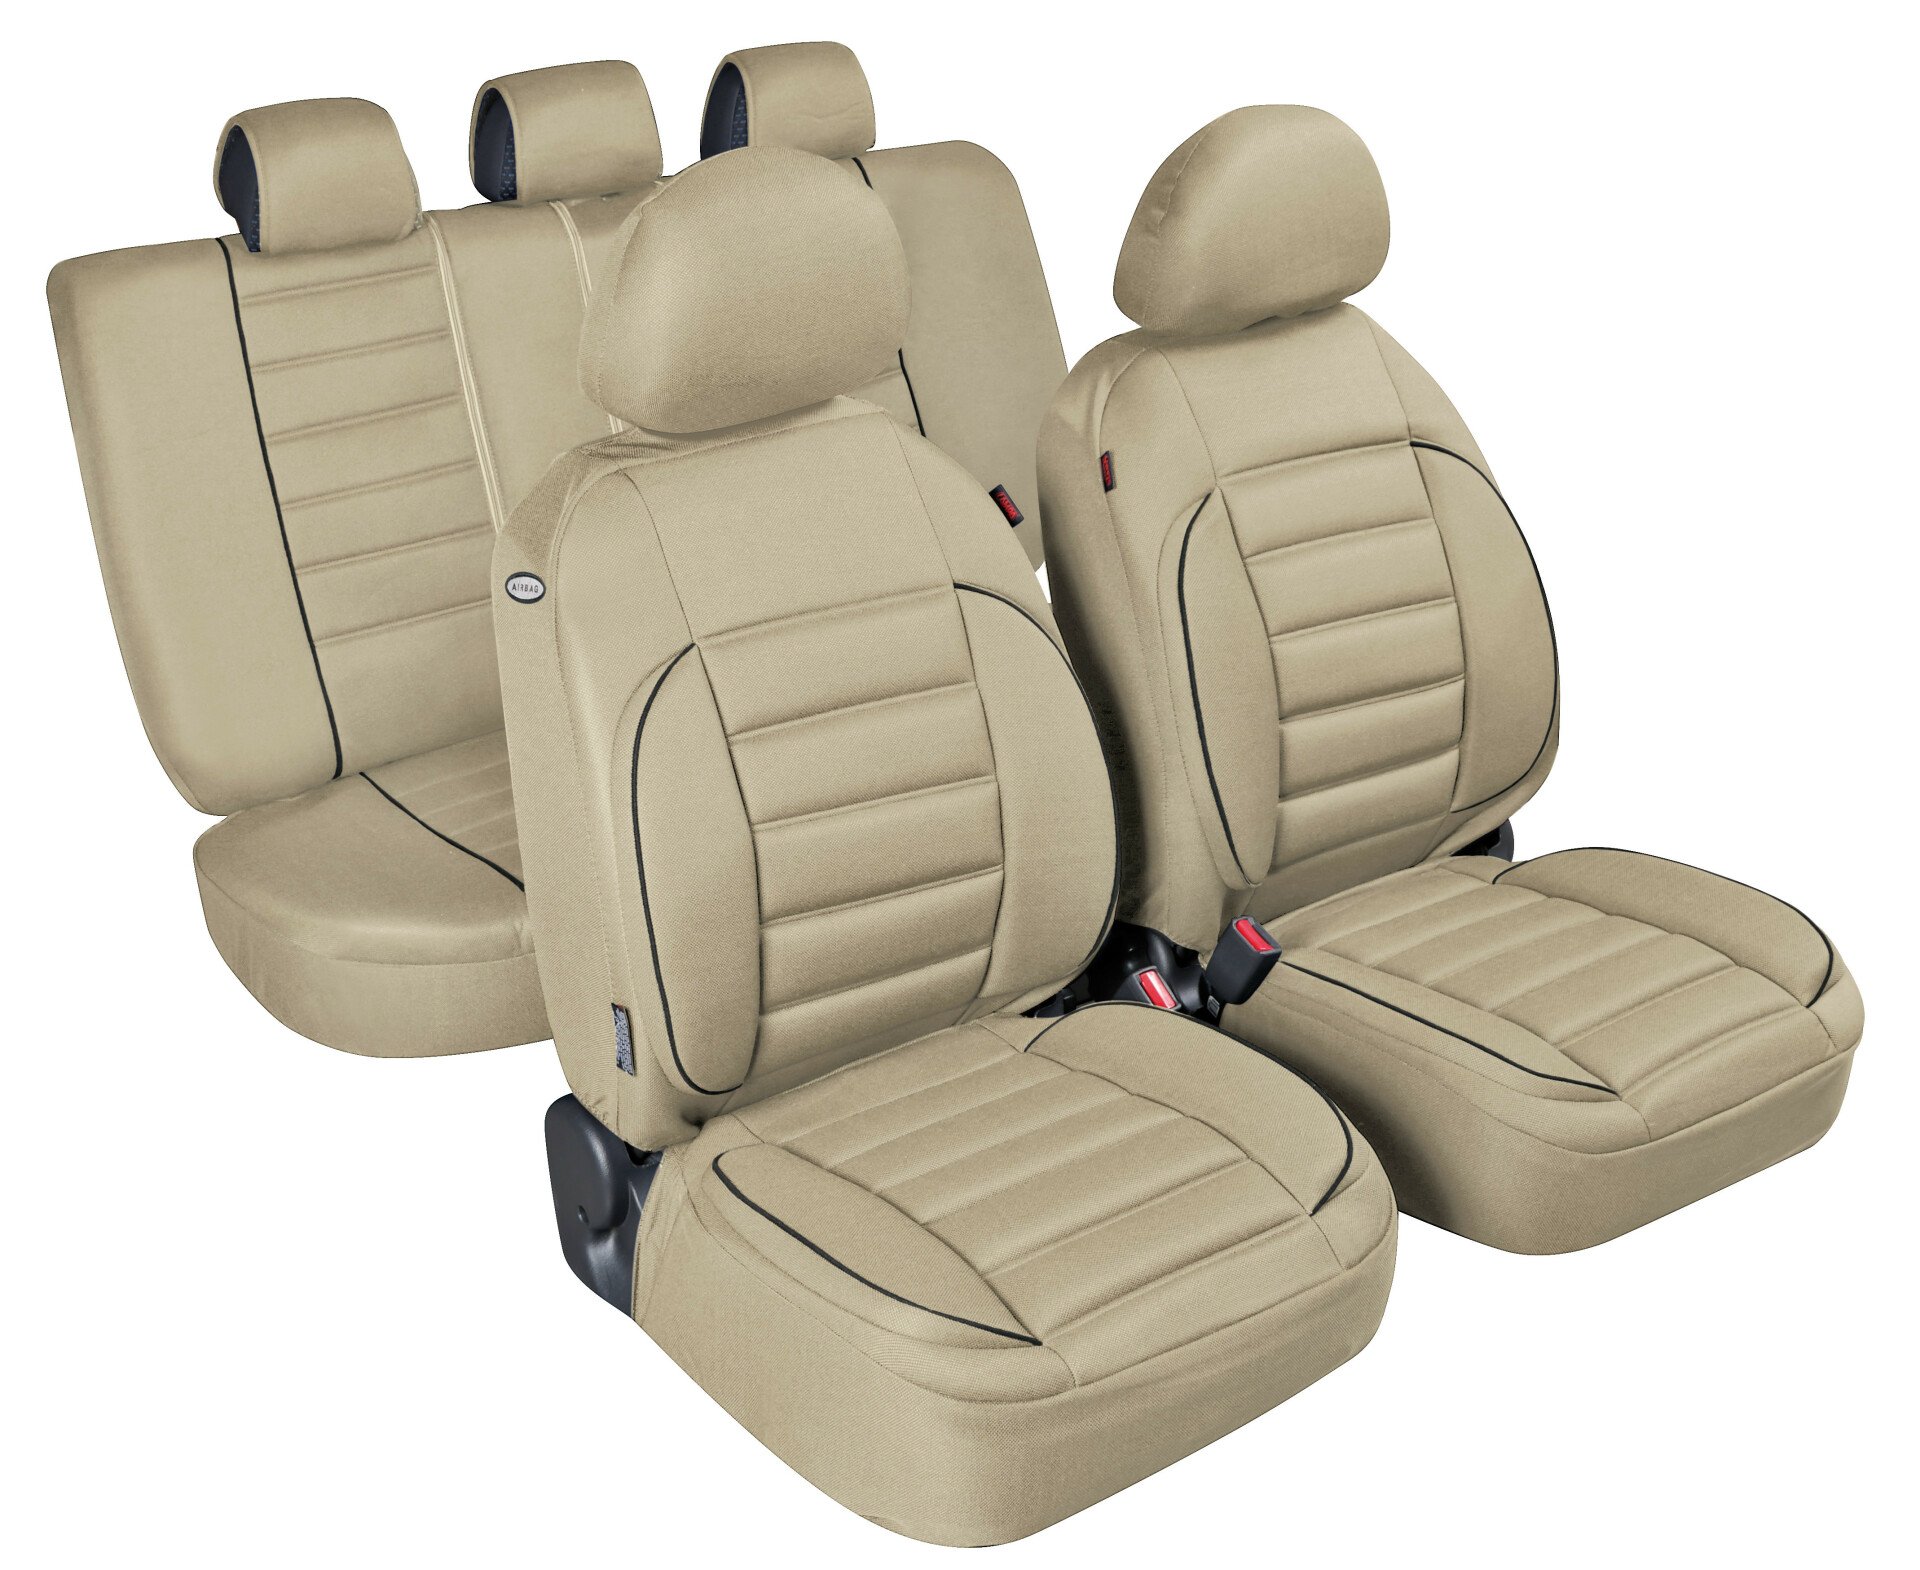 De-Luxe Sport Edition, high-quality seat cover set - Beige thumb